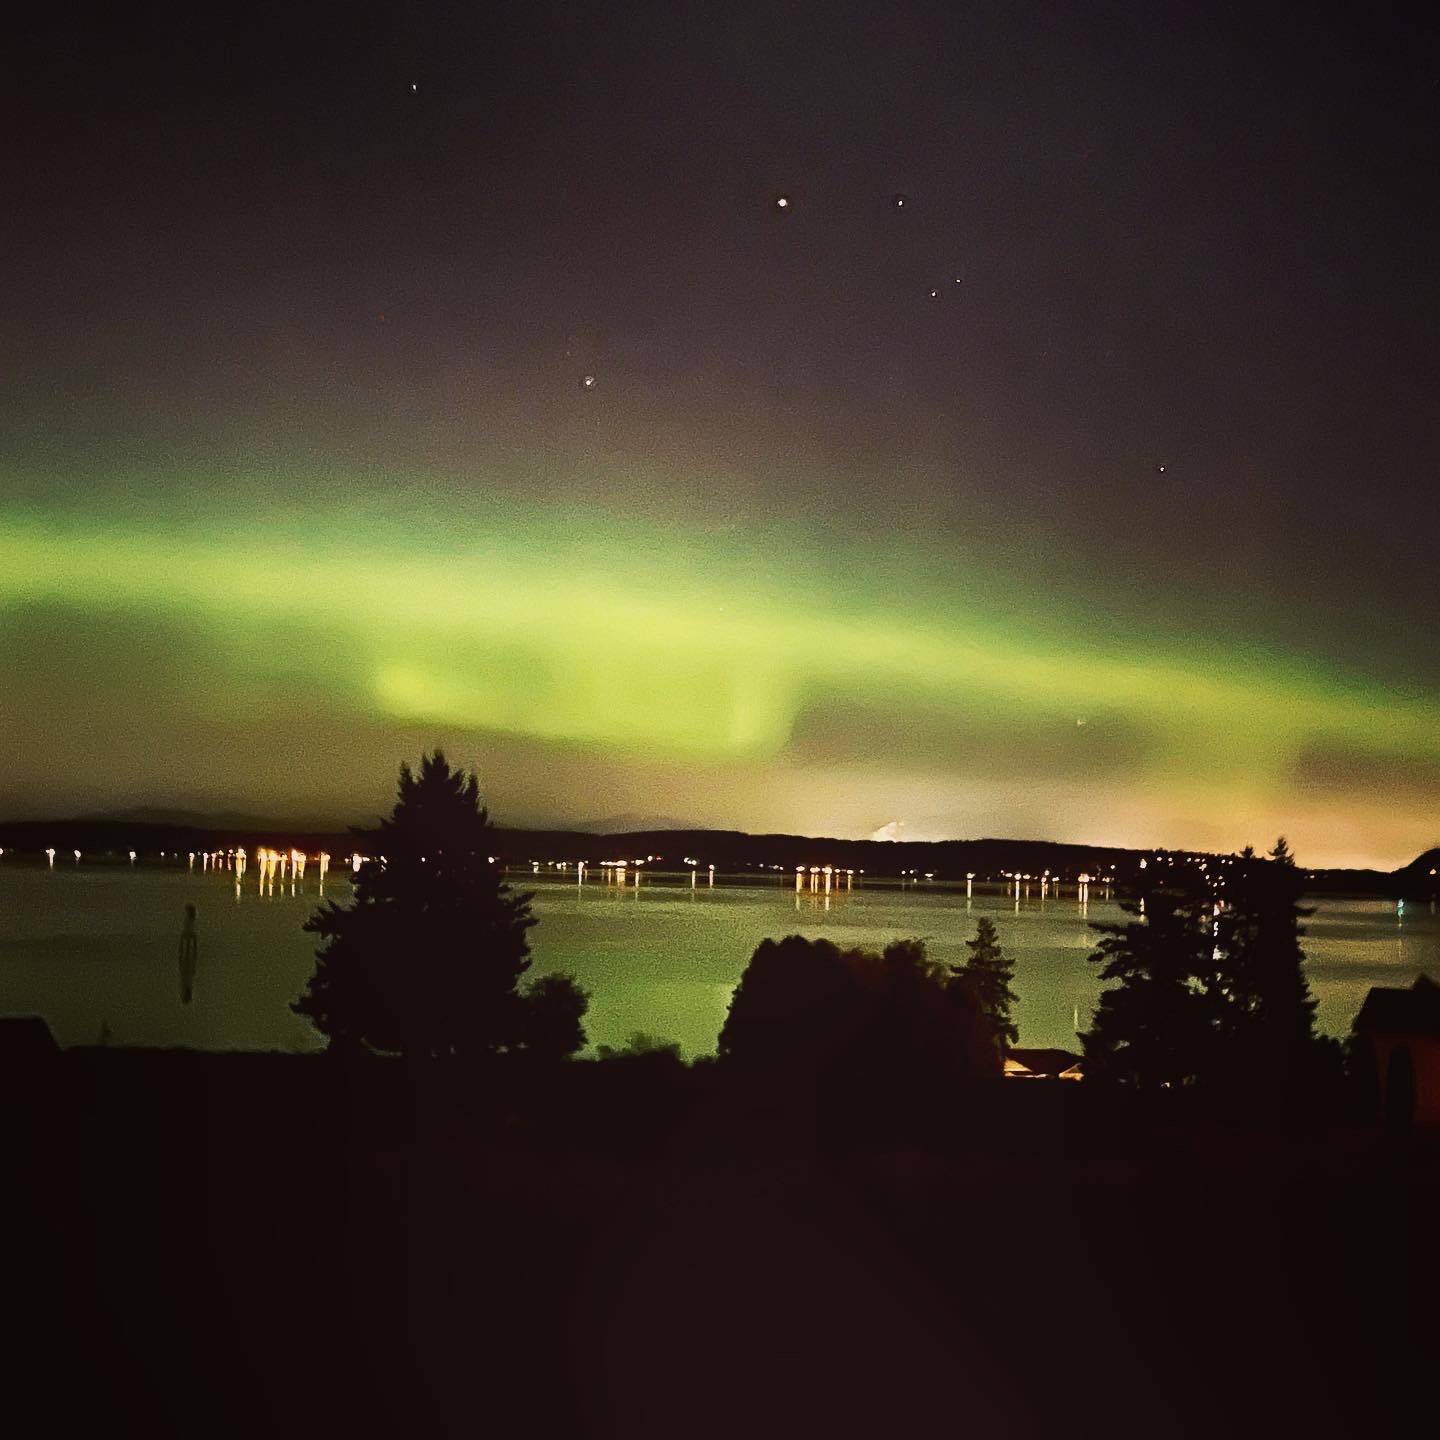 Photo by Theresa Farage
A photographer captured the Northern Lights over North Whidbey Tuesday night. Theresa Farage went to Dugualla Bay Heights Road looking toward La Conner armed with her Nikon D5200 camera and iPhone 12 Pro Max.